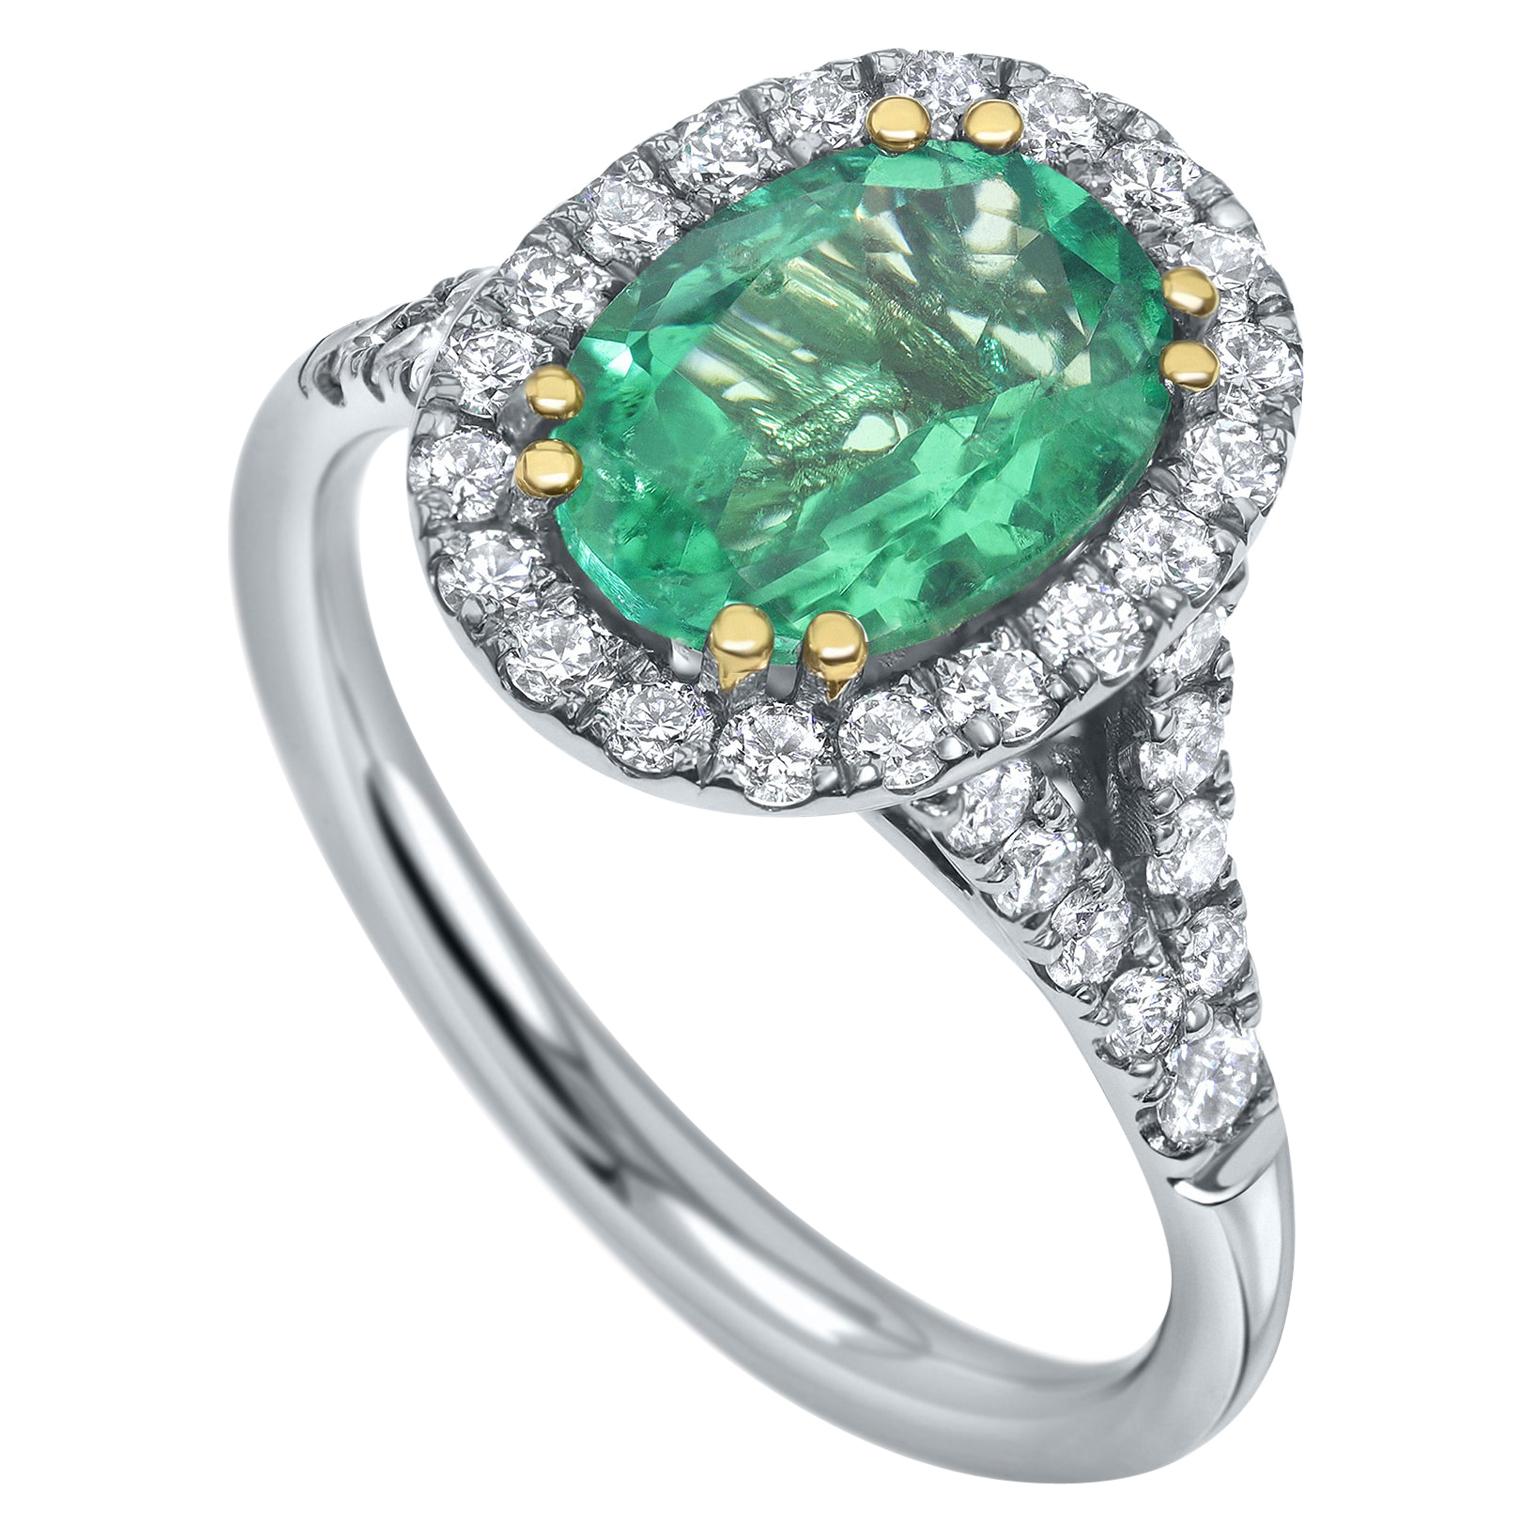 2.39 Carat 100% Natural Afghan Emerald Oval Cut and Diamonds Ring in White Gold